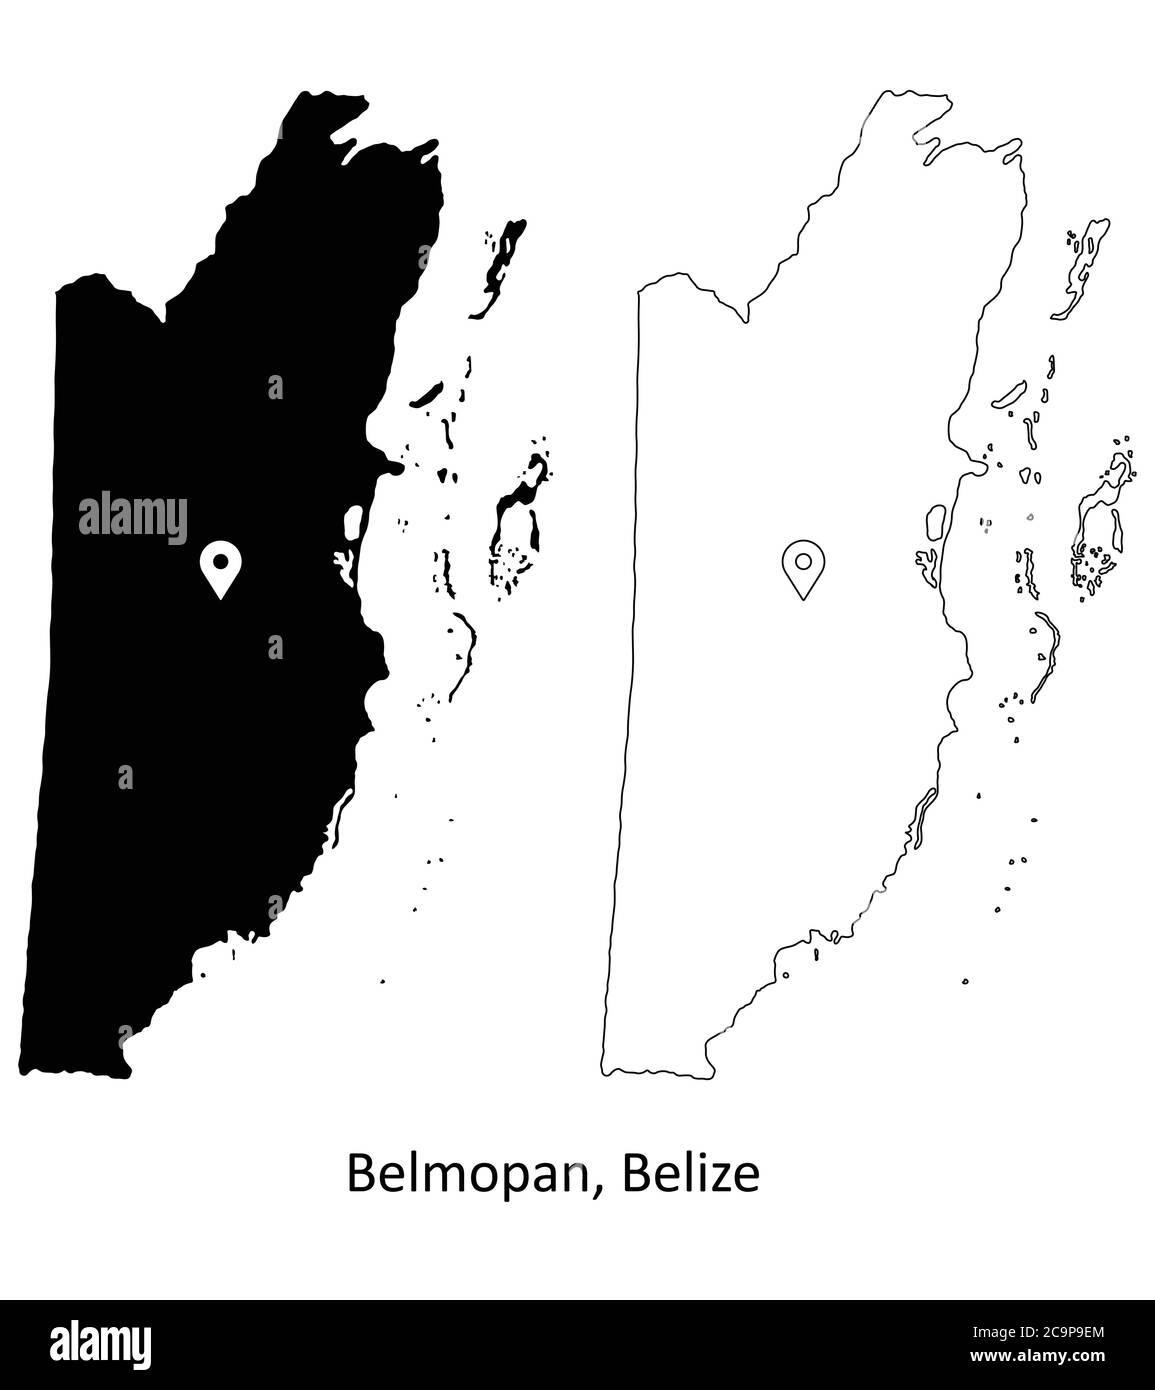 Belmopan Belize. Detailed Country Map with Location Pin on Capital City. Black silhouette and outline maps isolated on white background. EPS Vector Stock Vector